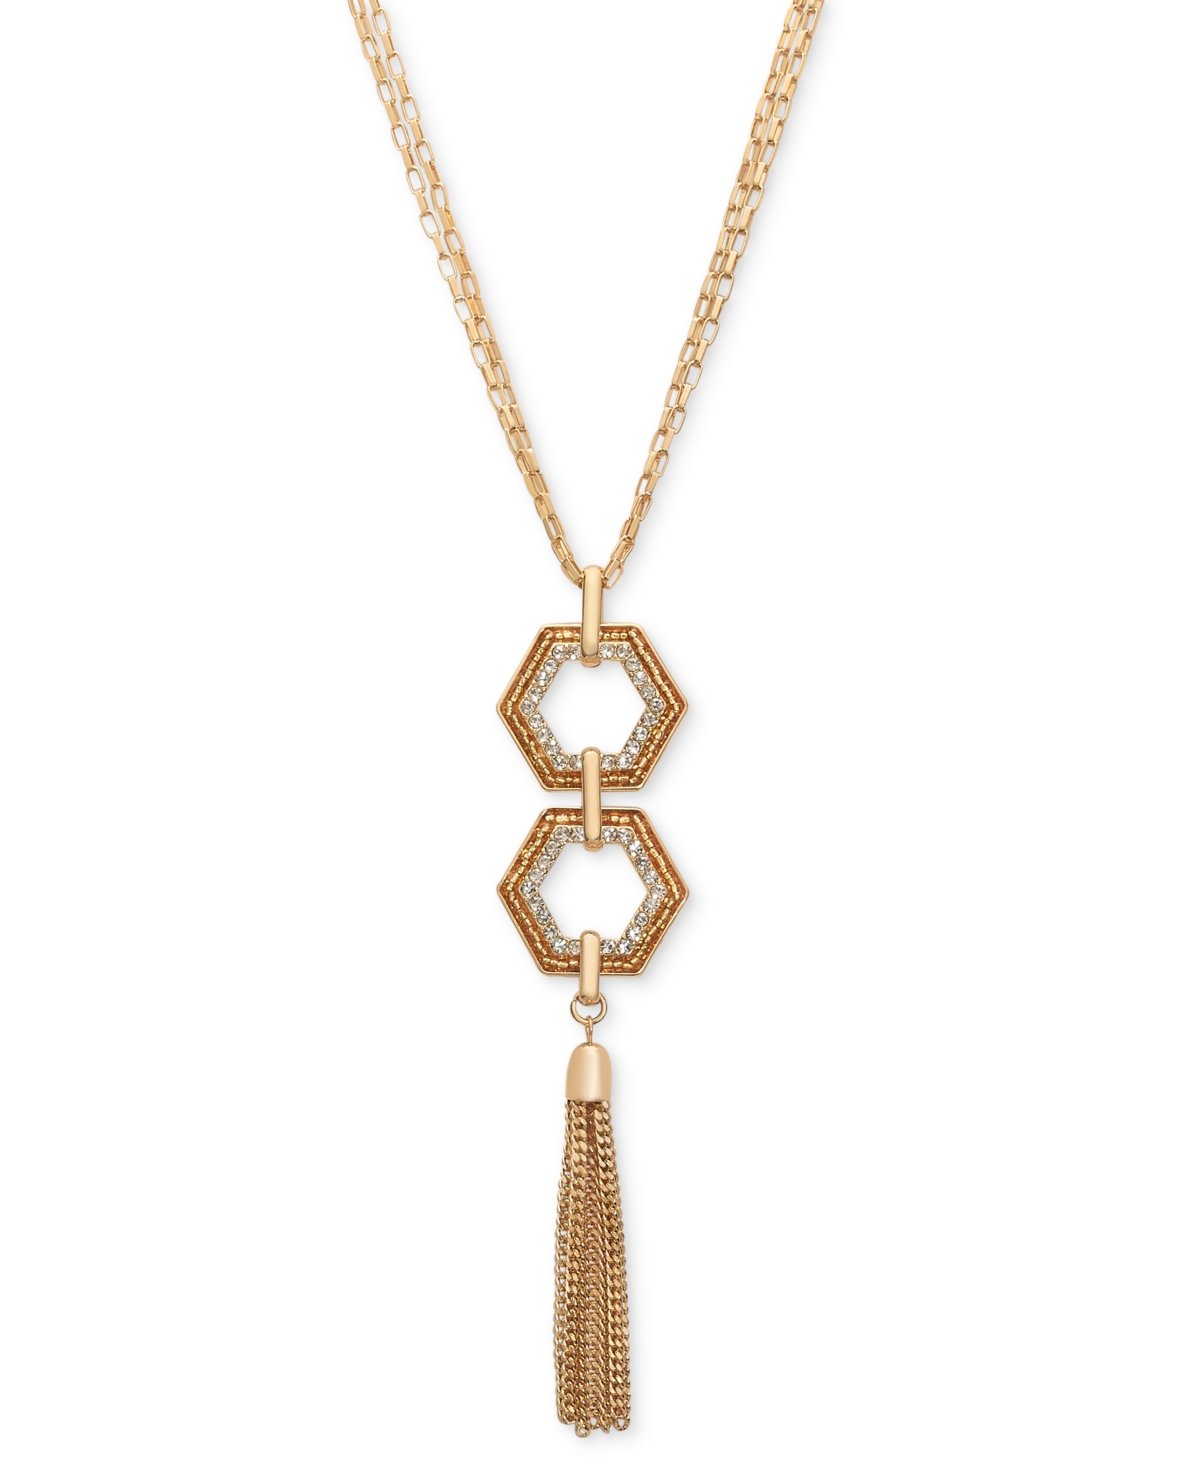 Pave & Beaded Hexagon Chain Tassel Pendant Necklace, 28" + 3" extender, Created for Macy's - Silver